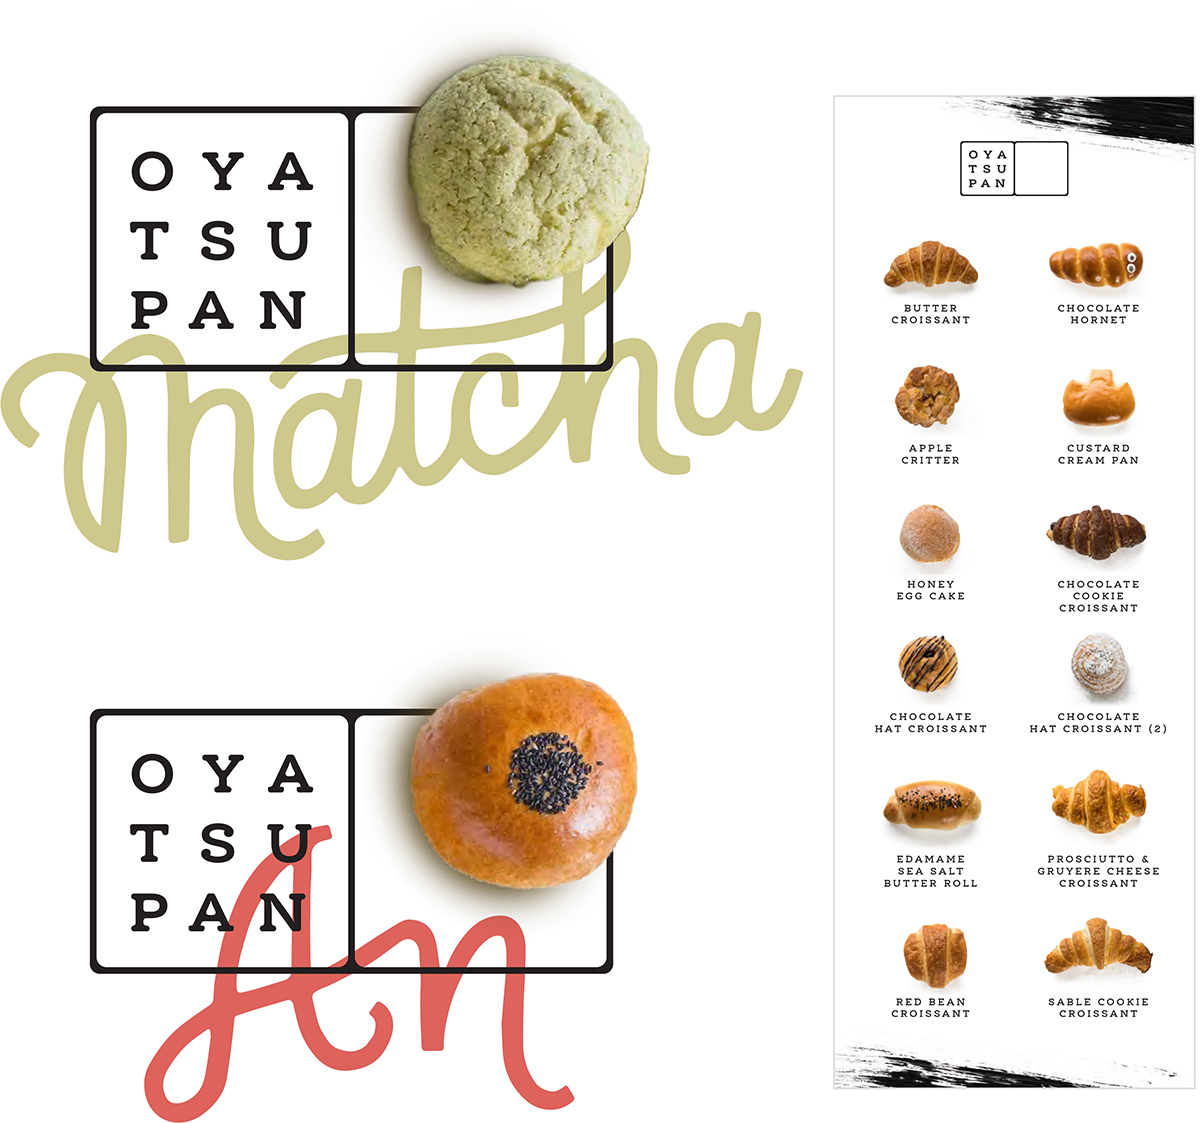 Design system created for Oya Tsu Pan bakery, featuring mix of clean typography with script lettering and physical baked goods, laid out to interact with each other on white background. 